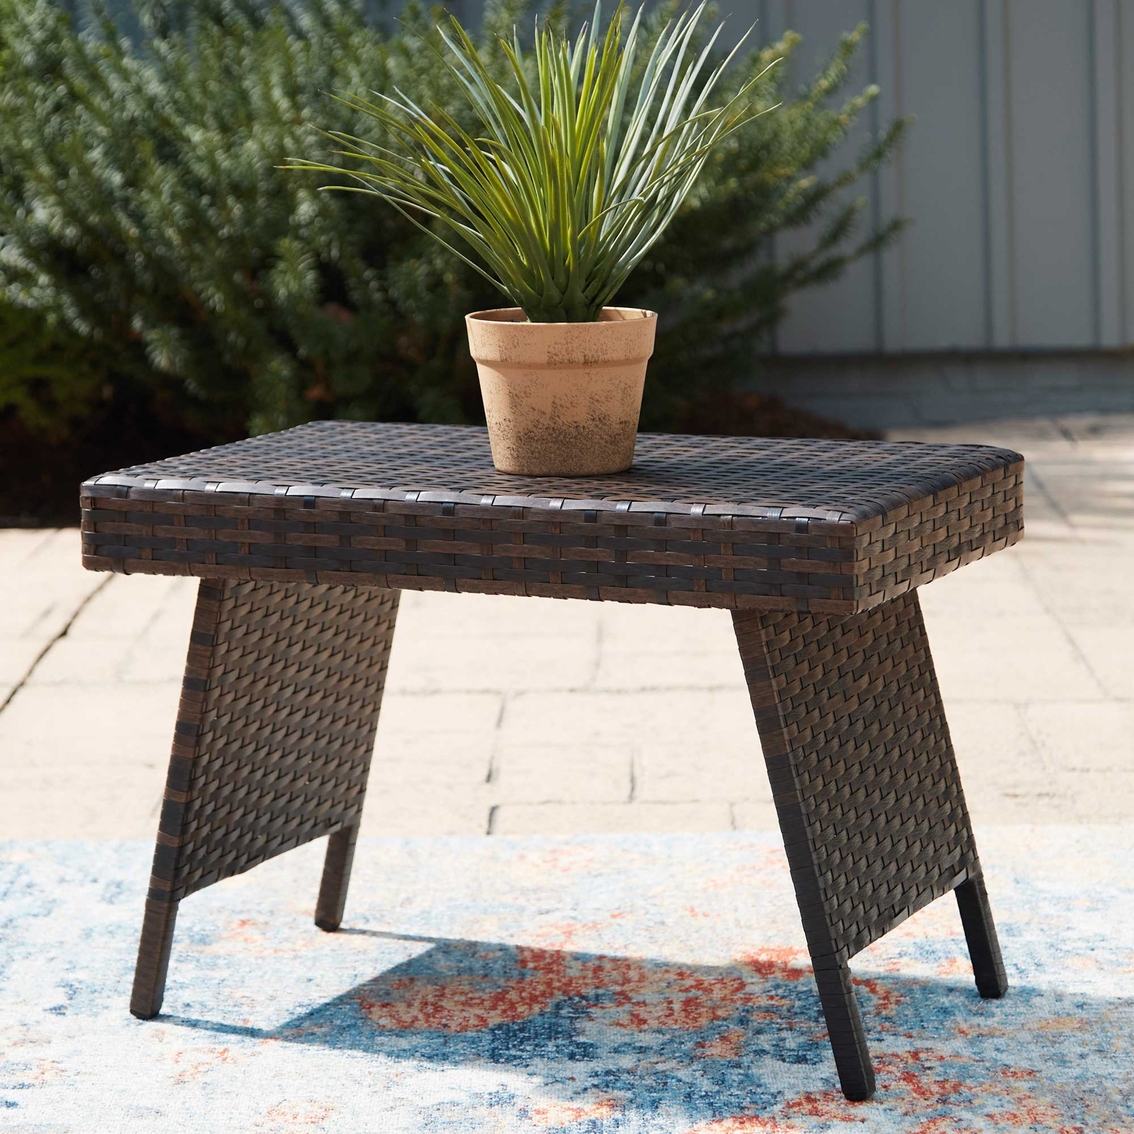 Signature Design by Ashley Kantana Outdoor End Table - Image 3 of 3